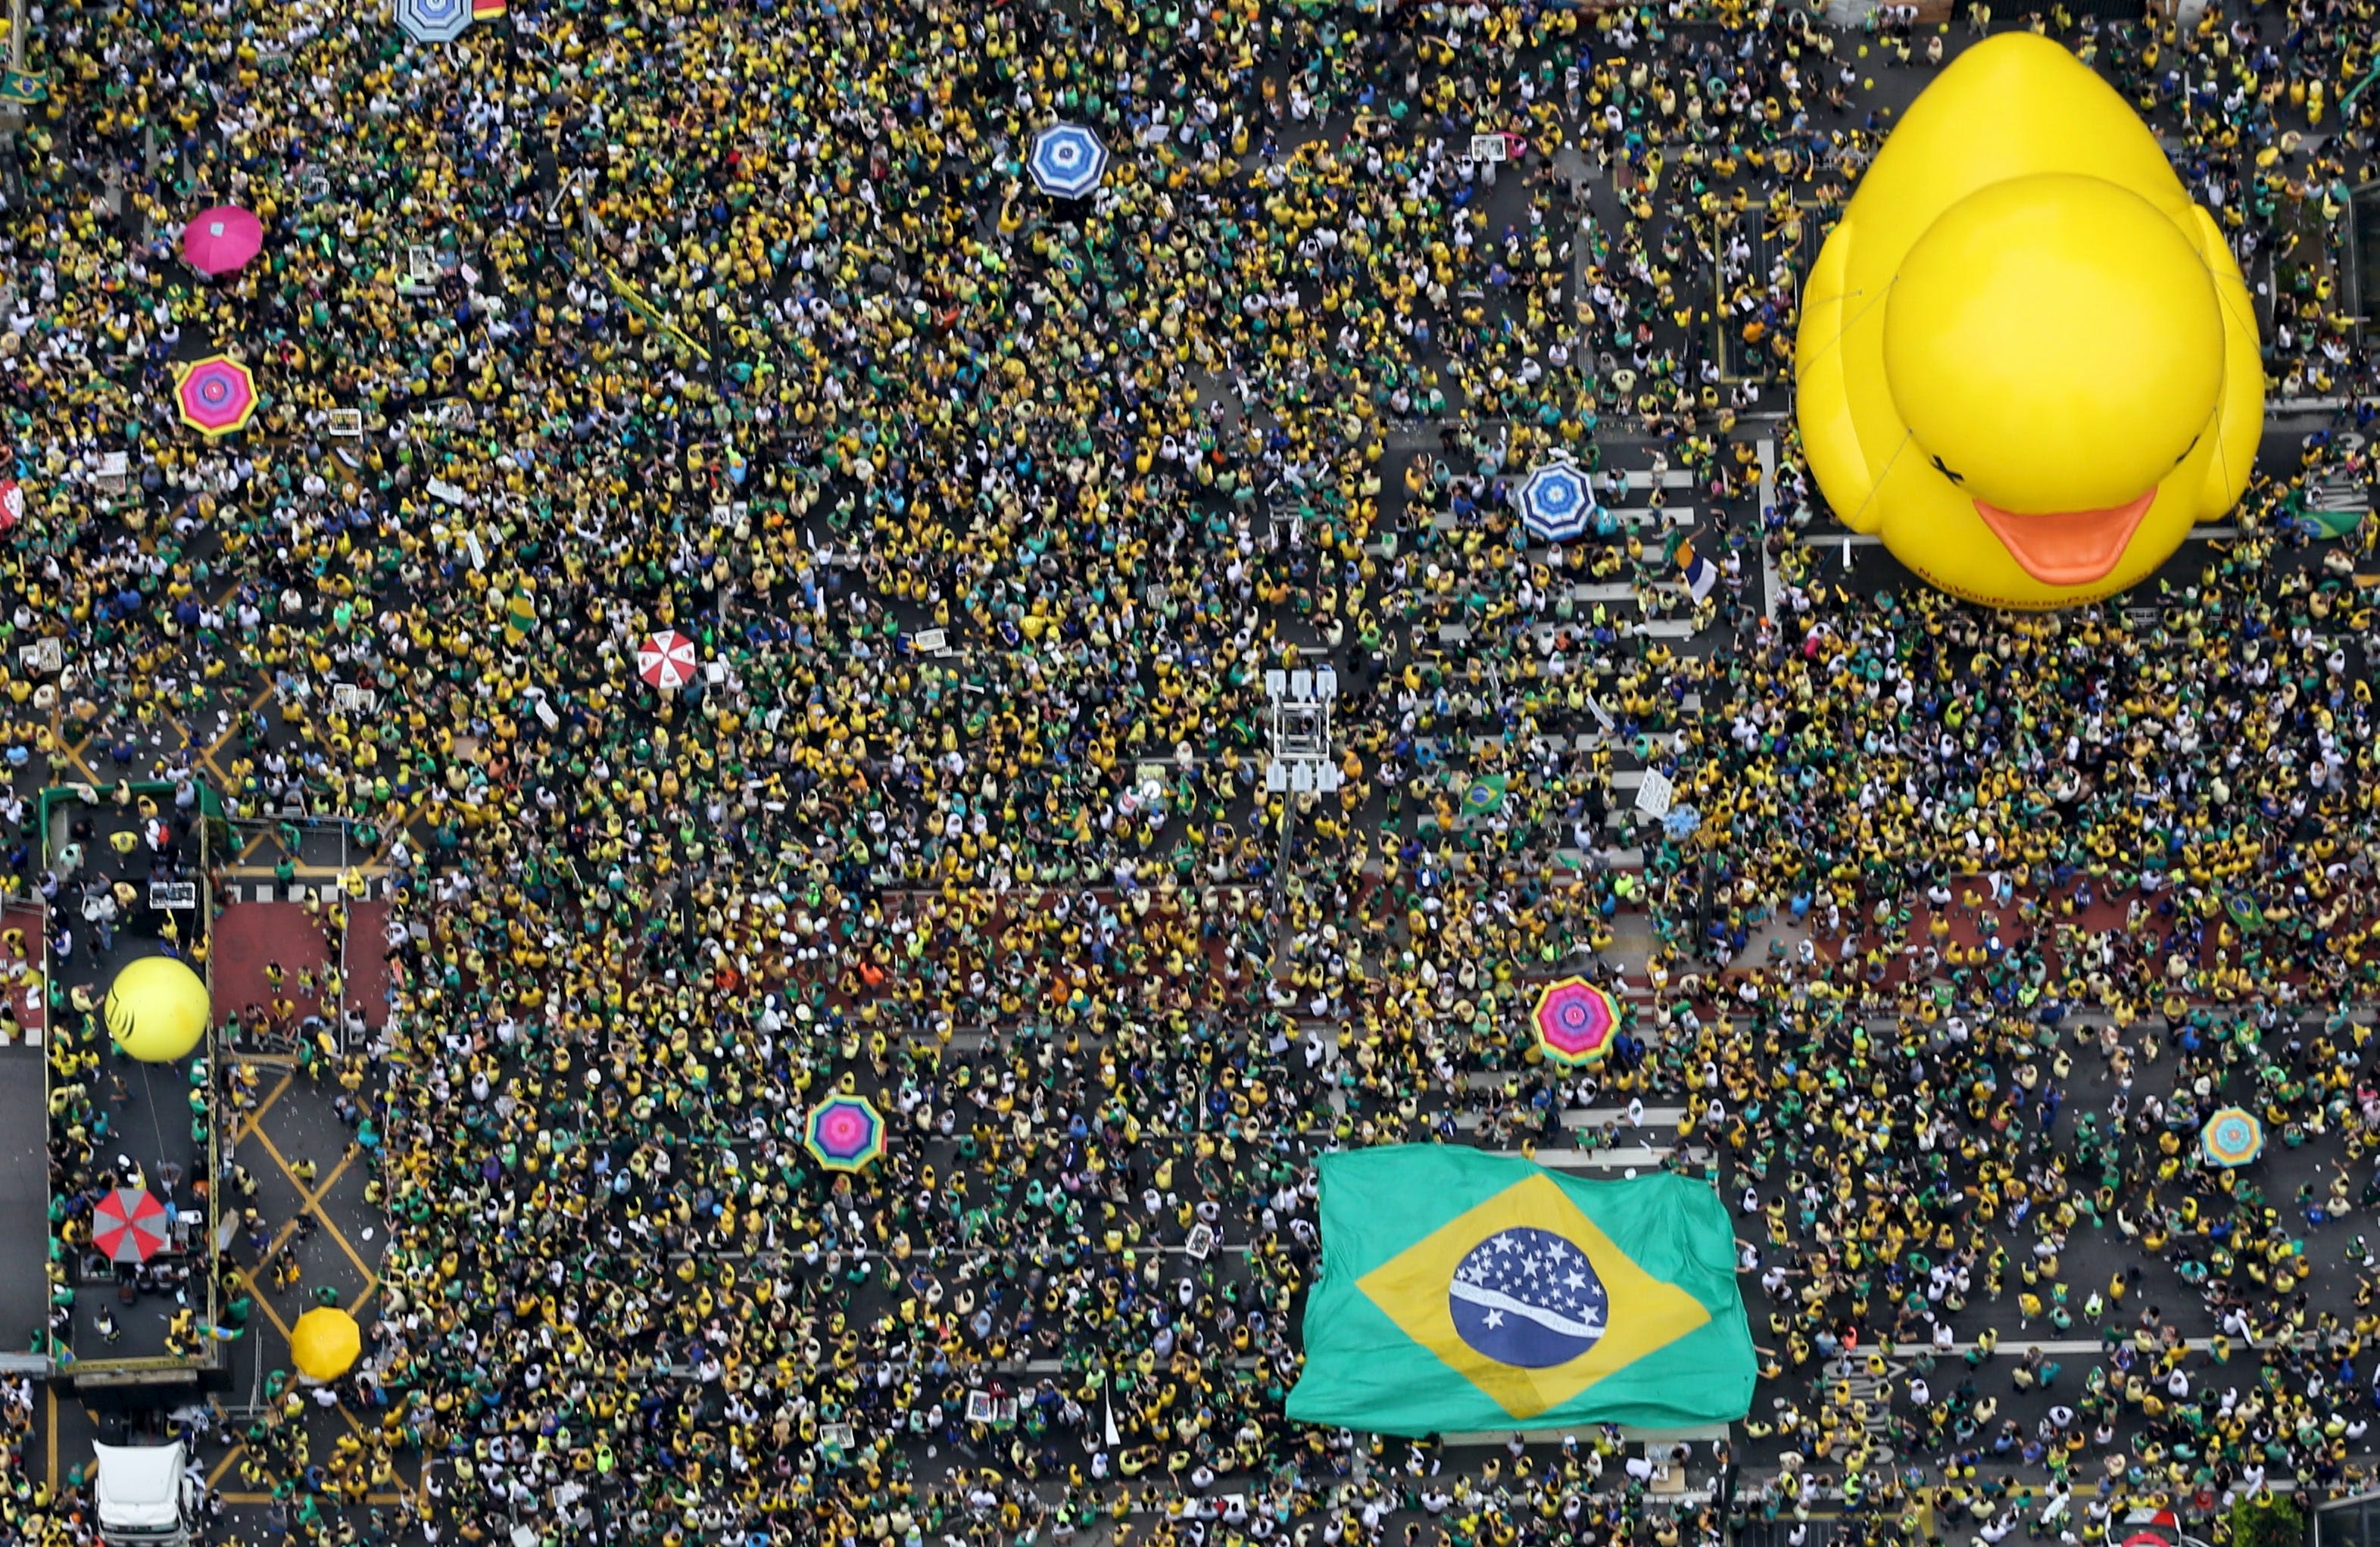 Demonstrators attend a protest against Brazil's President Dilma Rousseff, part of nationwide protests calling for her impeachment, in Sao Paulo